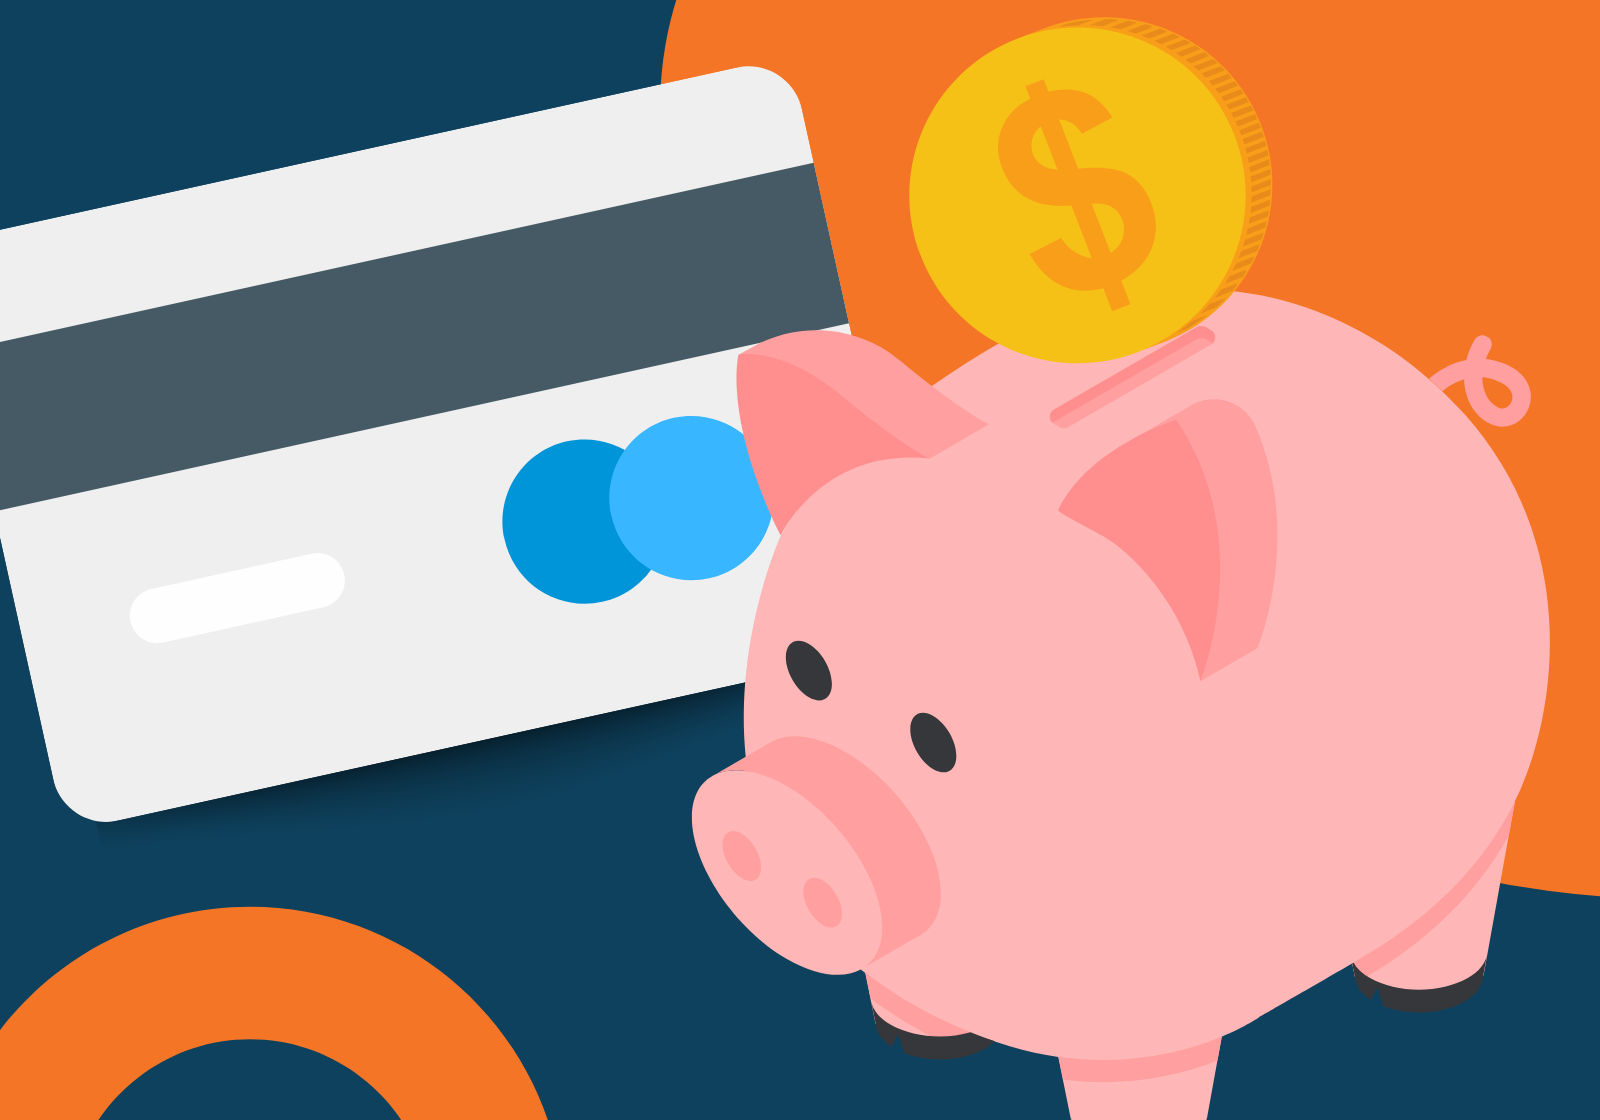 Graphic design of a debit card and piggy bank